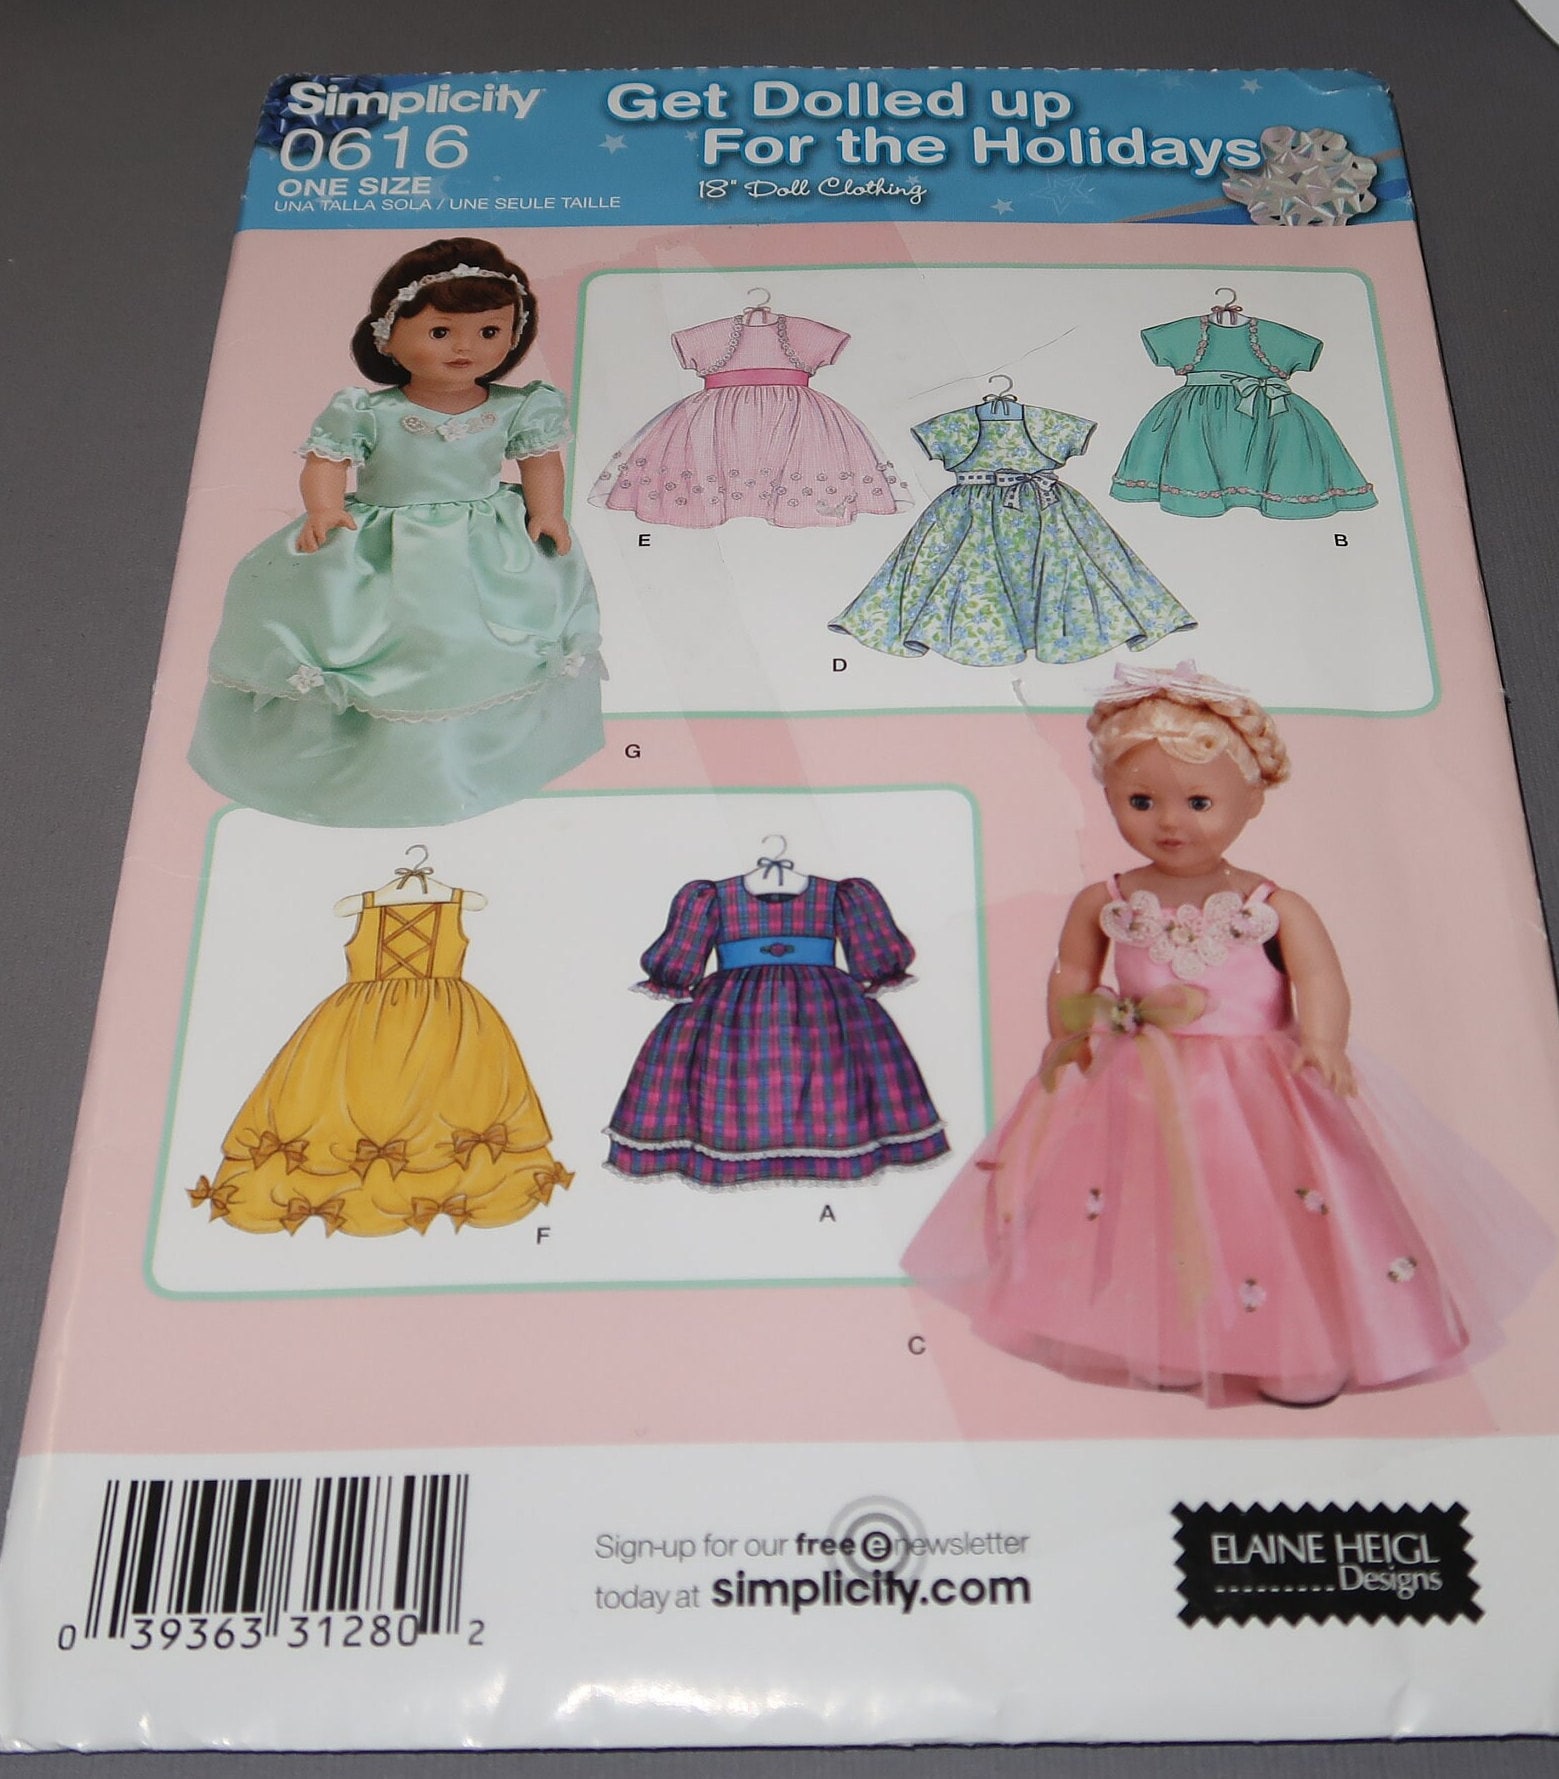 Simplicity 8766 Pattern for 16 and 18" Doll Dresses for sale online 